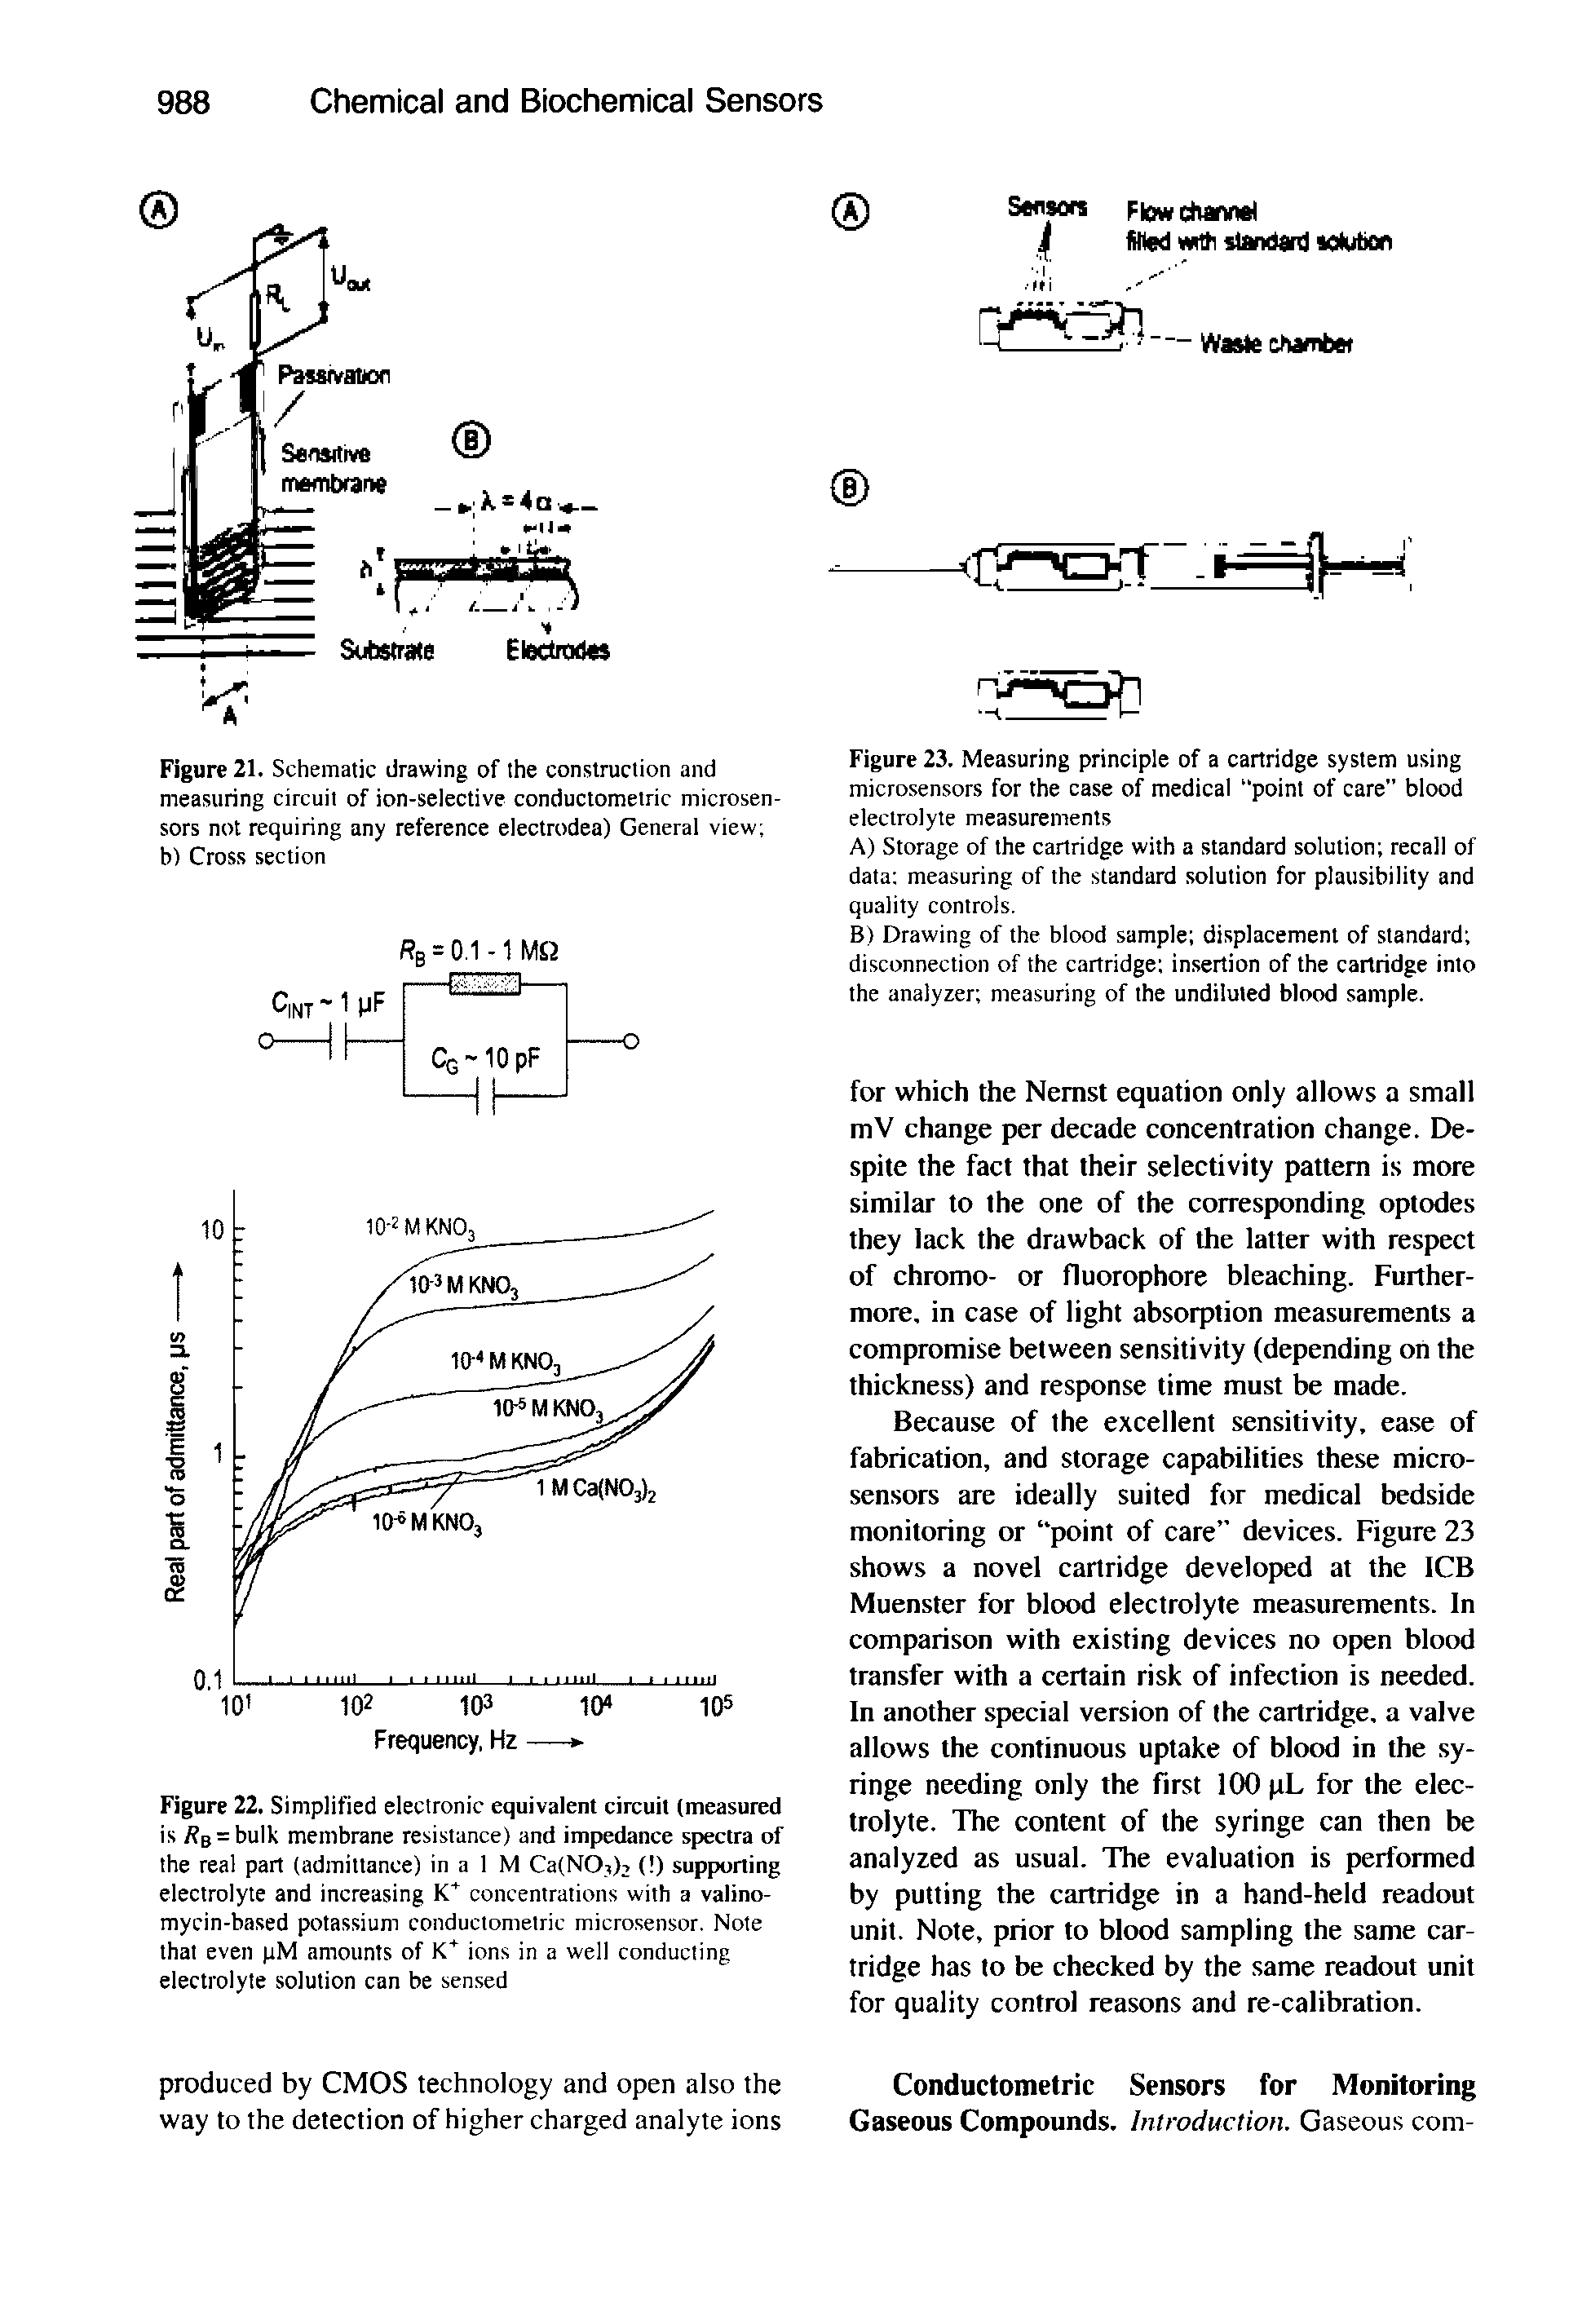 Figure 22. Simplified electronic equivalent circuit (measured is / B = bull membrane resistance) and impedance spectra of the real part (admittance) in a 1 M Ca(N03>2 ( ) supporting electrolyte and increasing concentrations with a valino-mycin-based potassium conductometric microsensor. Note that even pM amounts of ions in a well conducting electrolyte solution can be sensed...